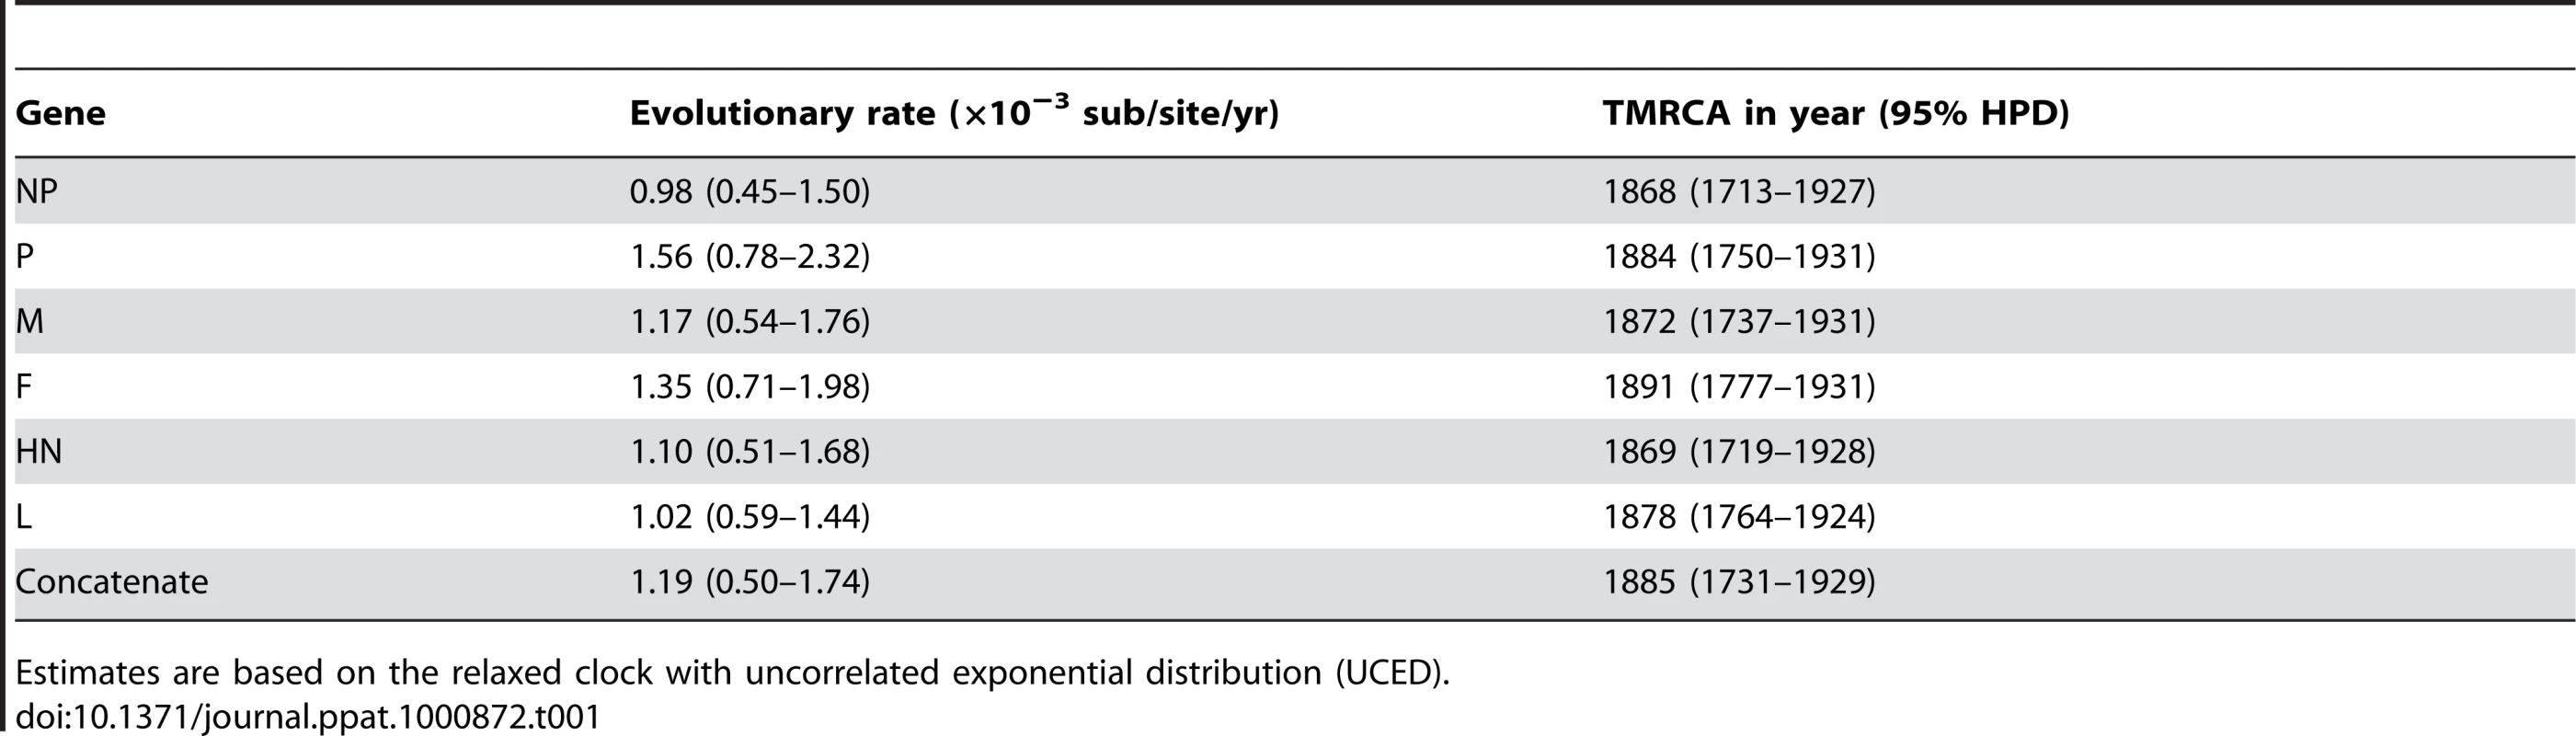 Bayesian estimates of evolutionary rates (nucleotide substitutions per site per year) and TMRCAs (in year) for different genes of class II PMV-1.